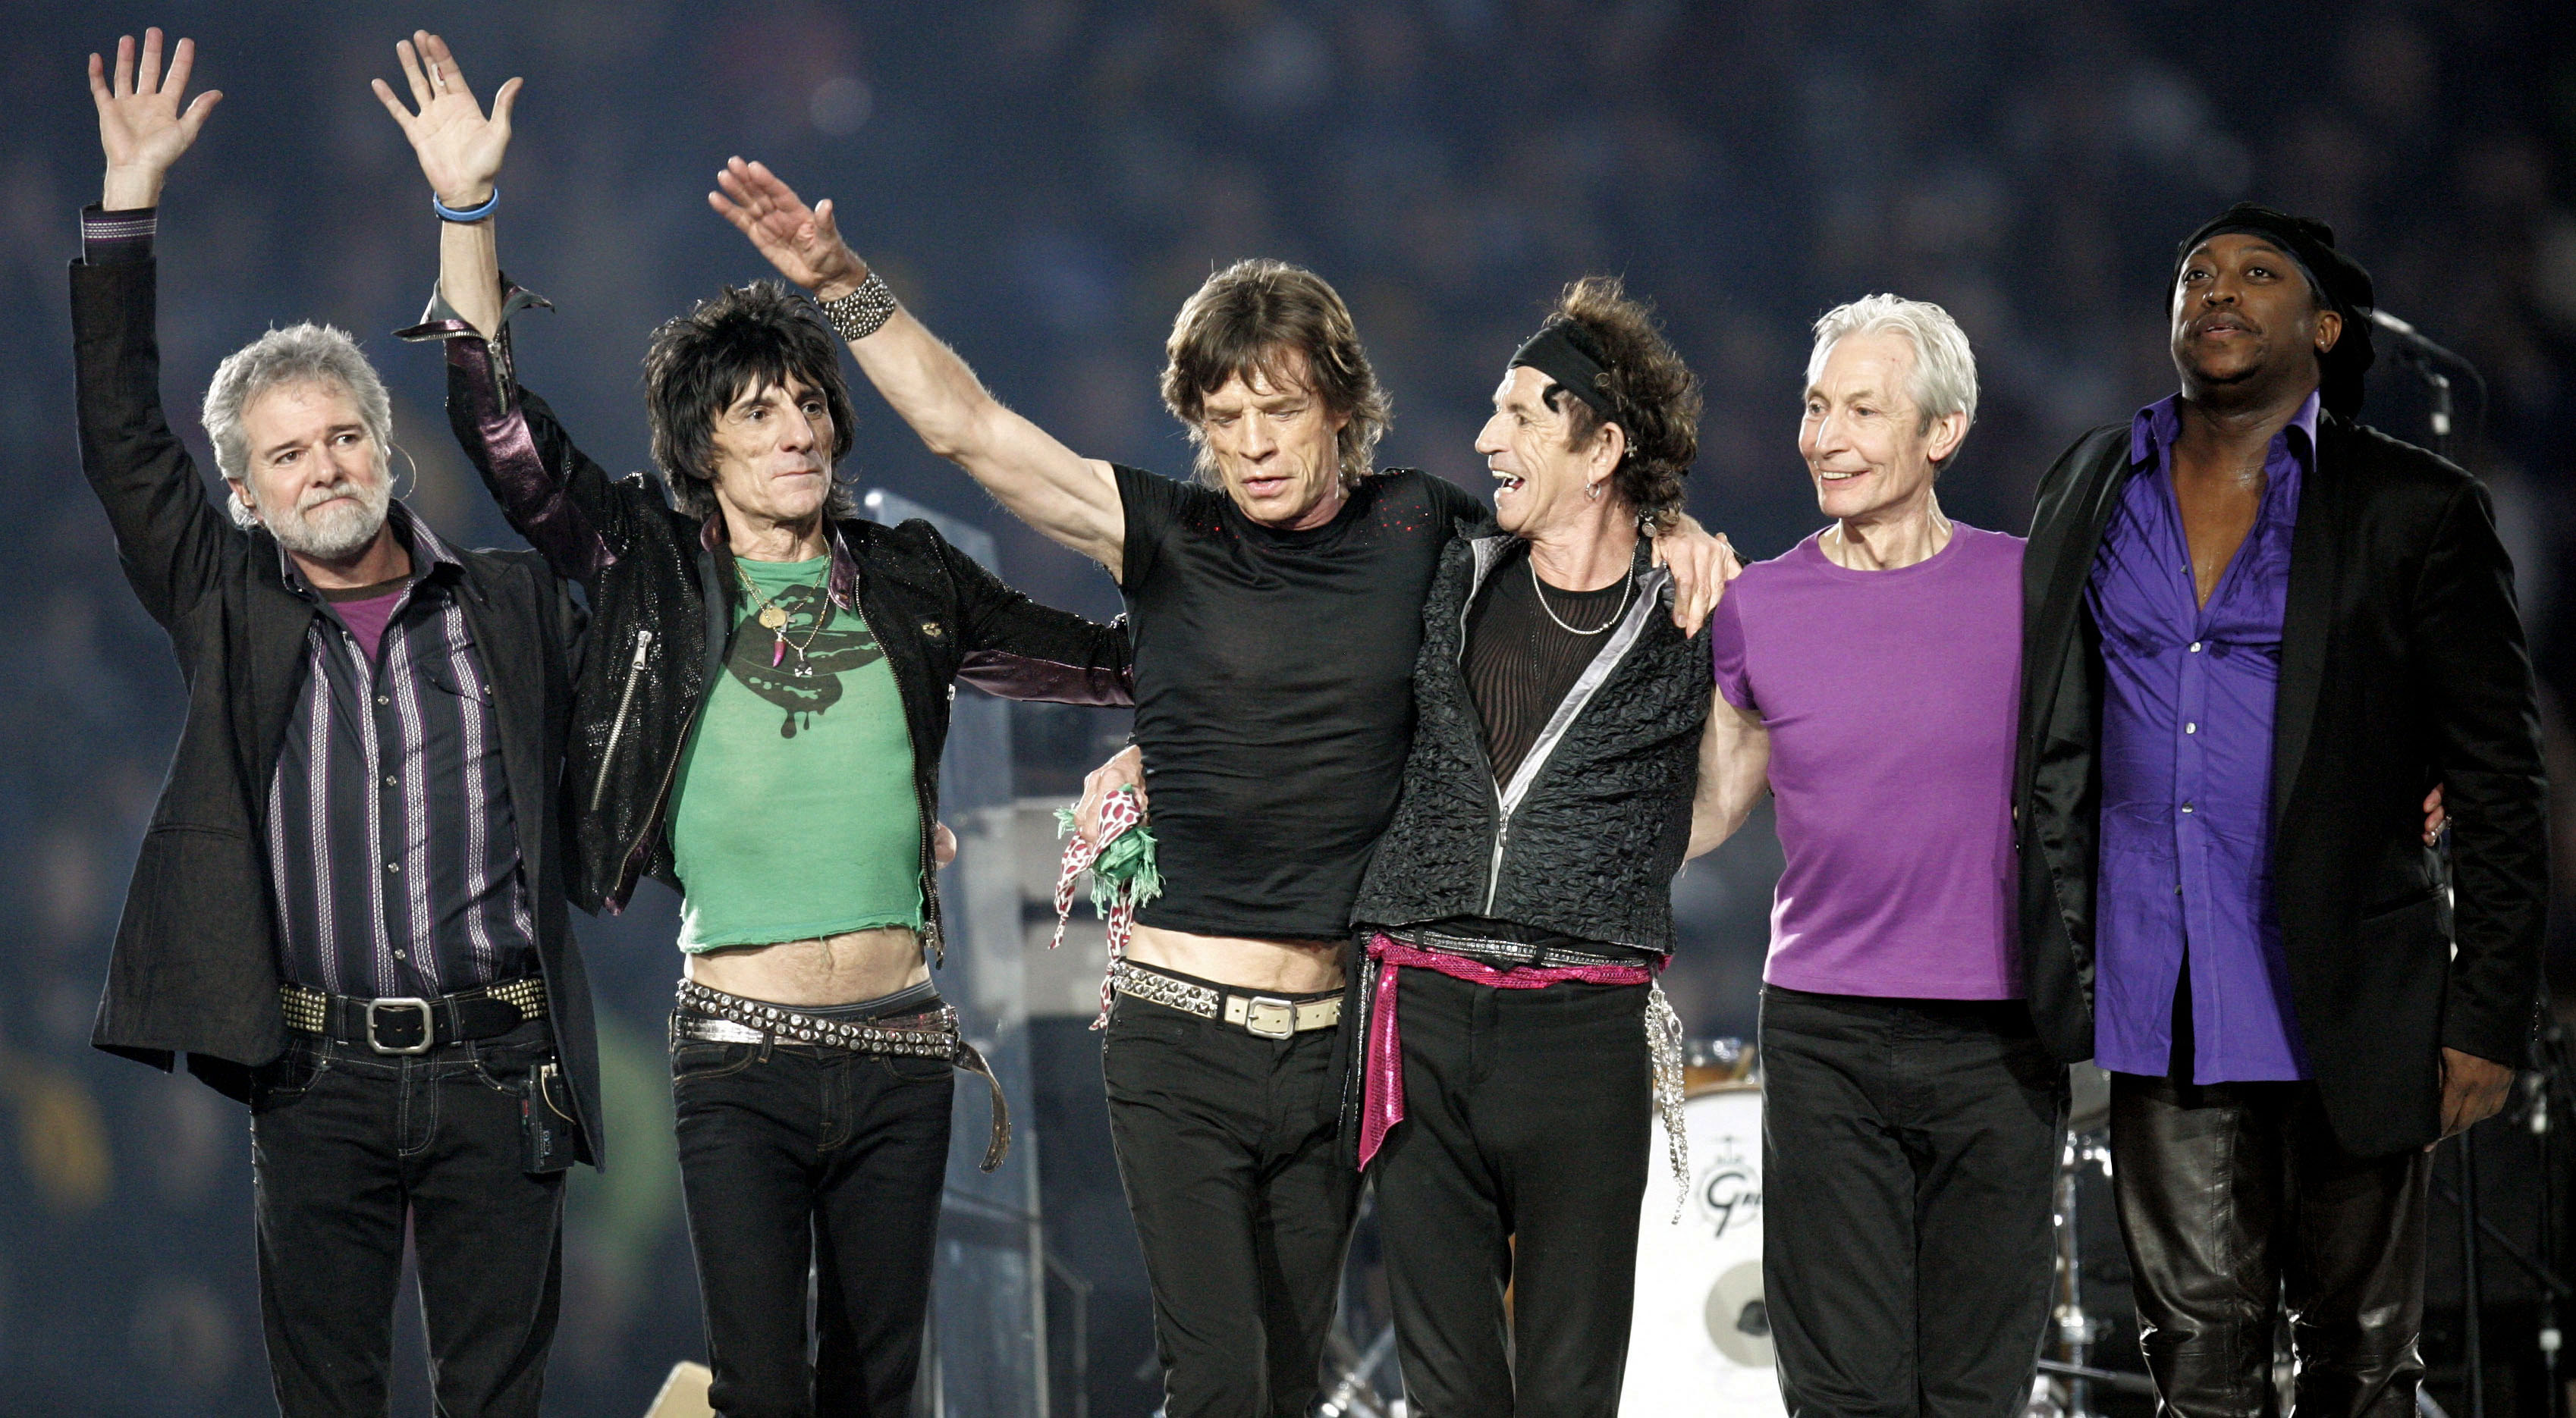 Rolling Stones to play first-ever show in Cuba - CBS News